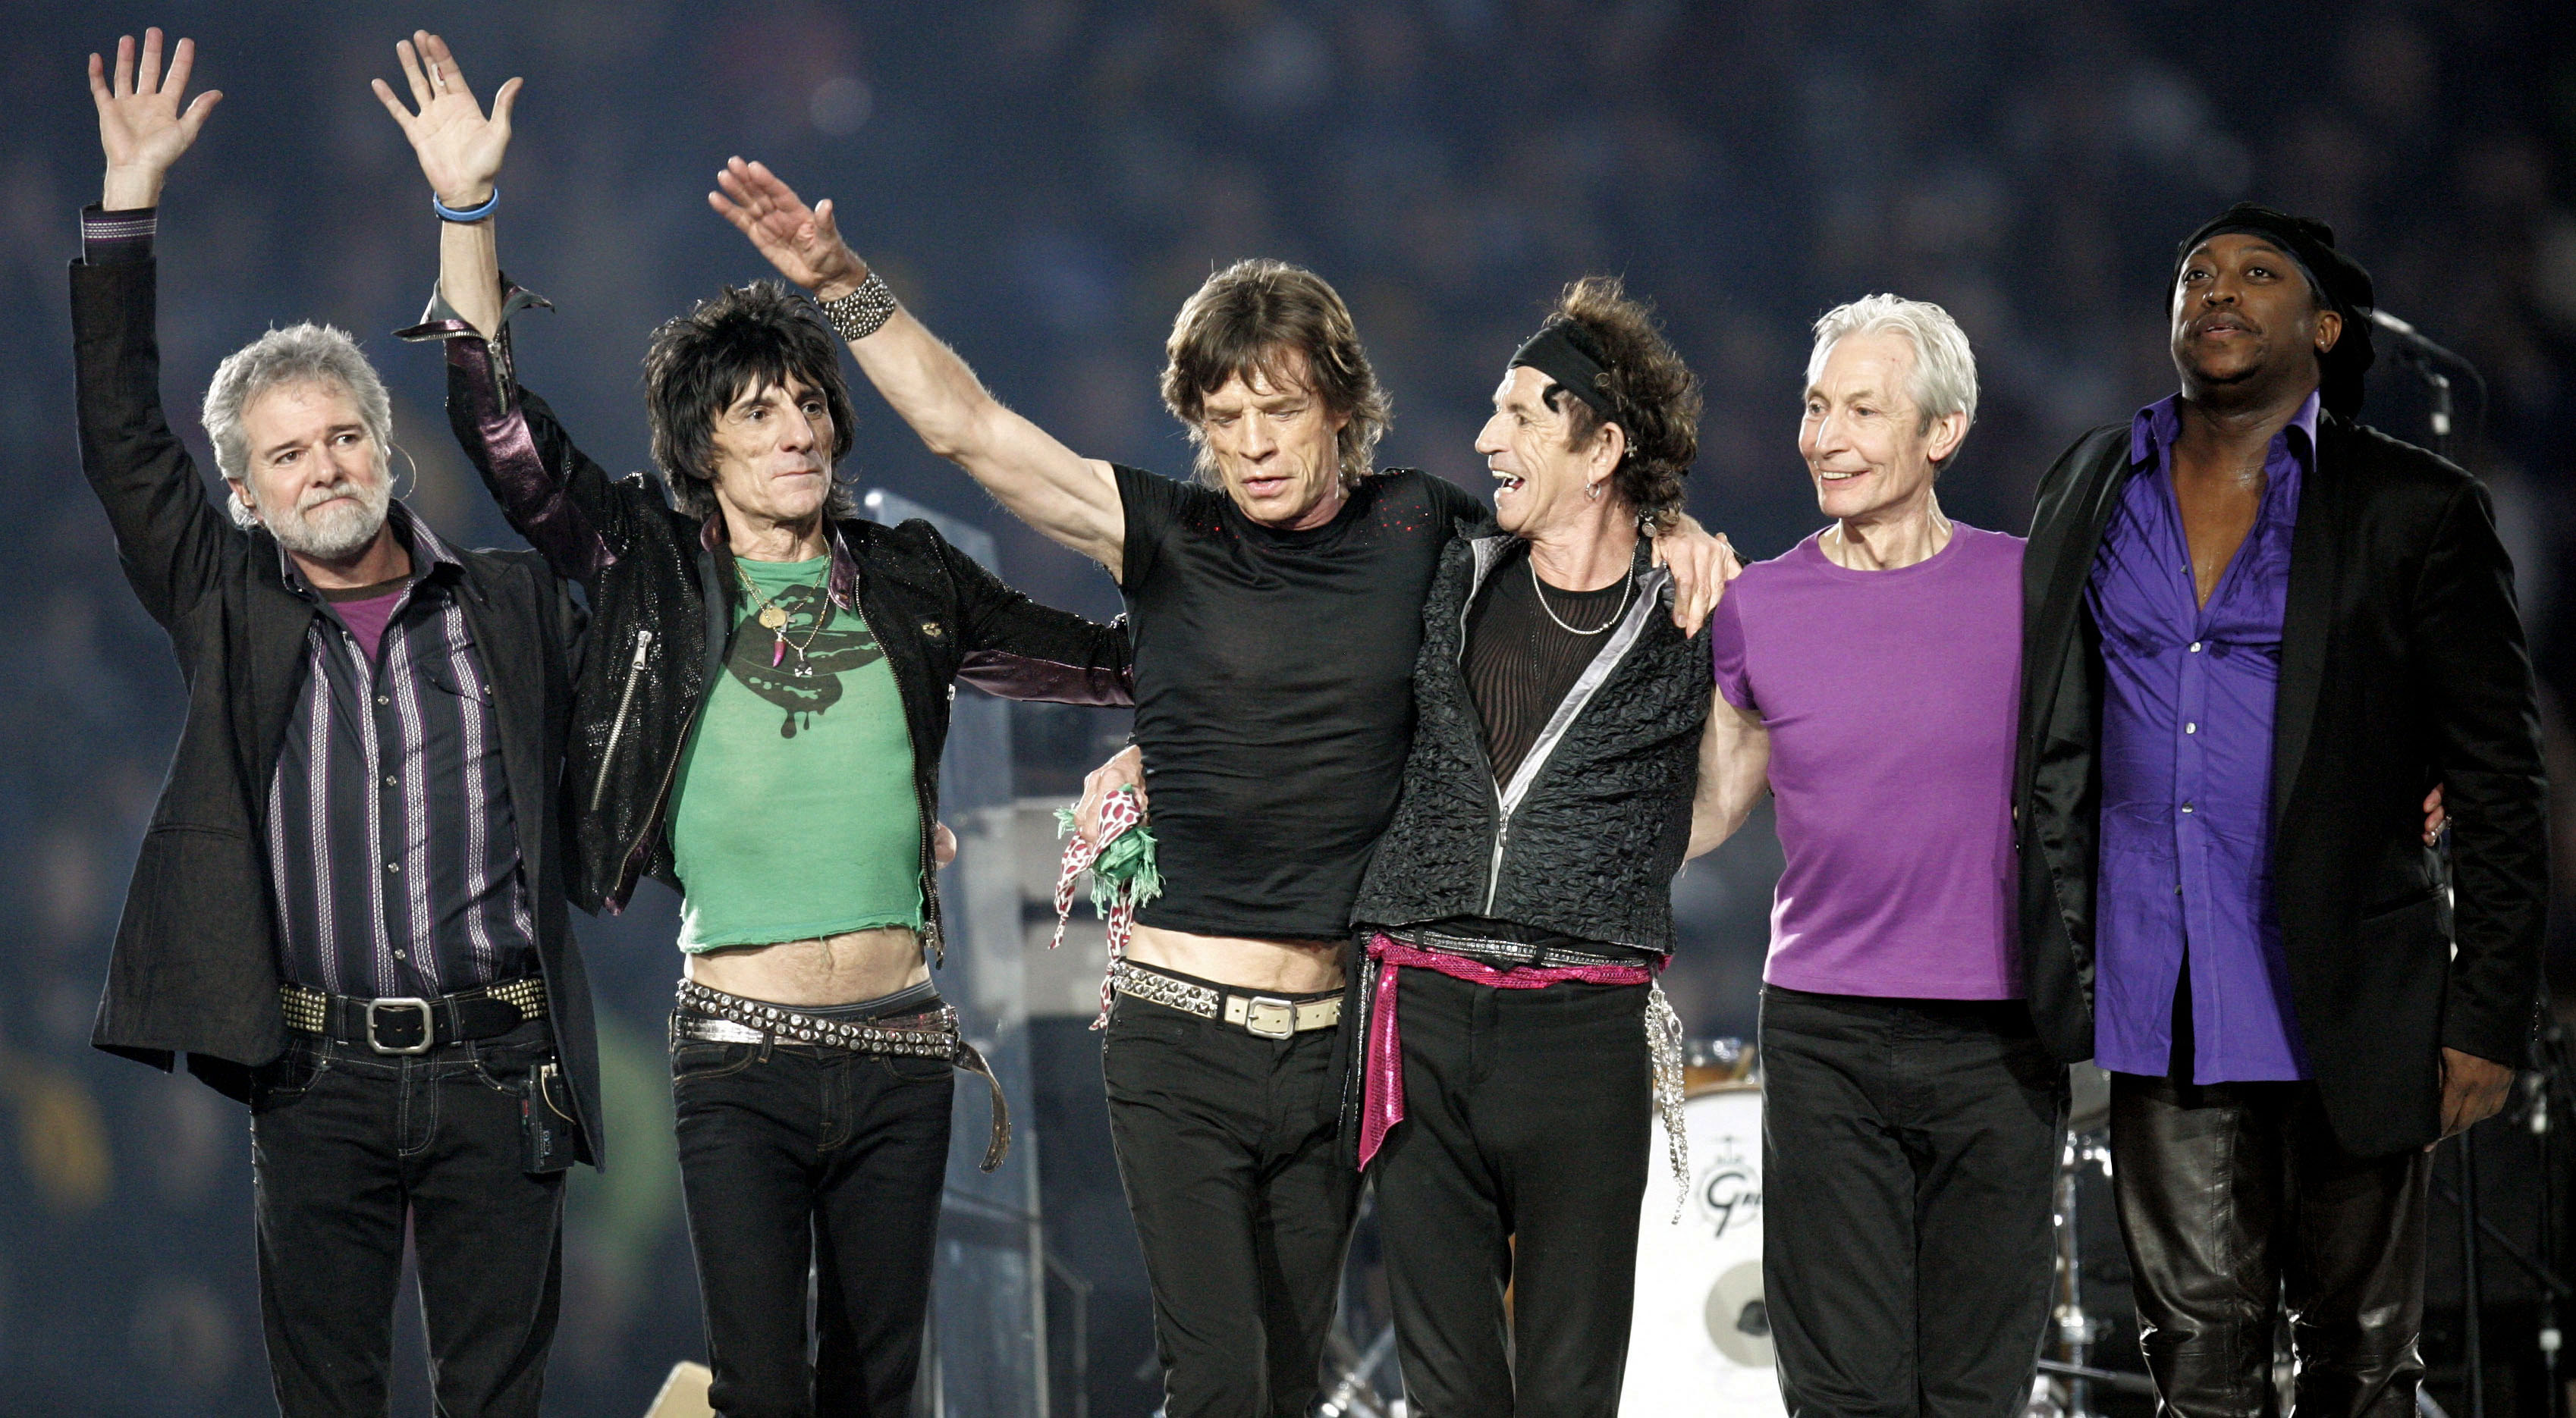 Rolling Stones to play first-ever show in Cuba - CBS News